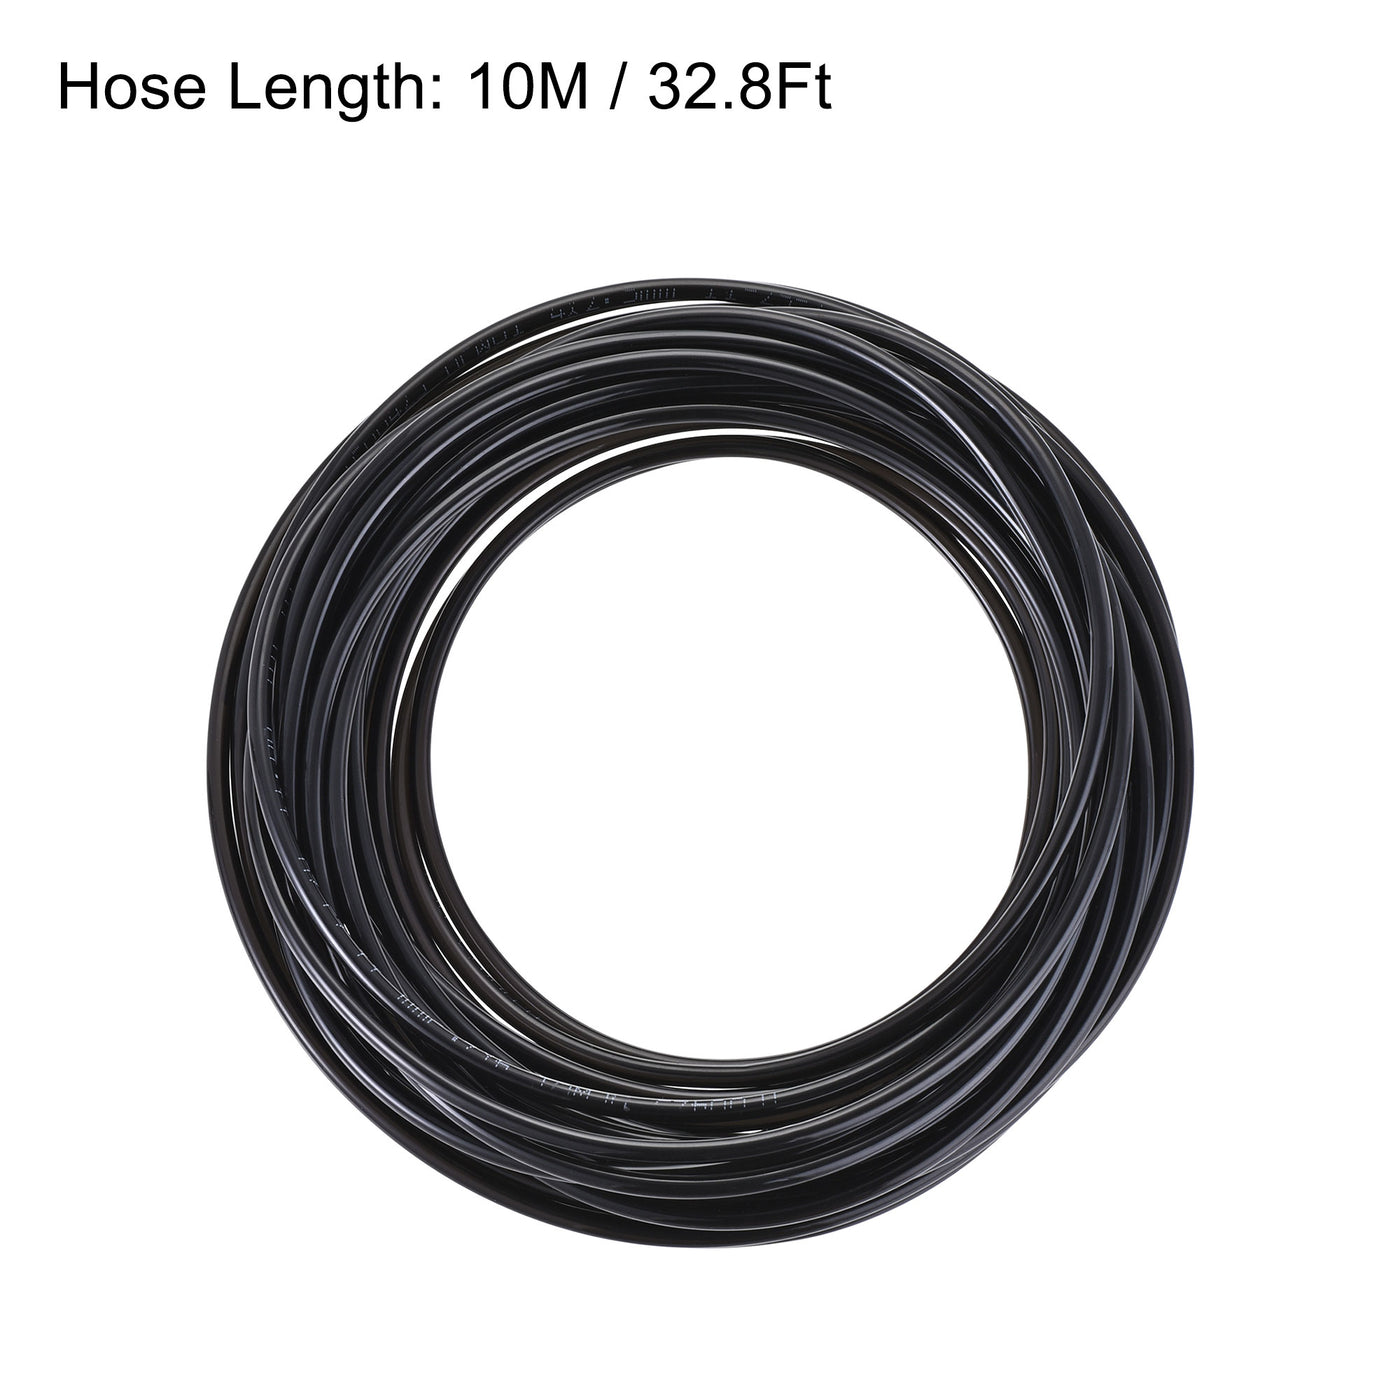 uxcell Uxcell Pneumatic 4mm OD PU Air Hose Tubing Kit 10M Black with Push to Connect Fittings